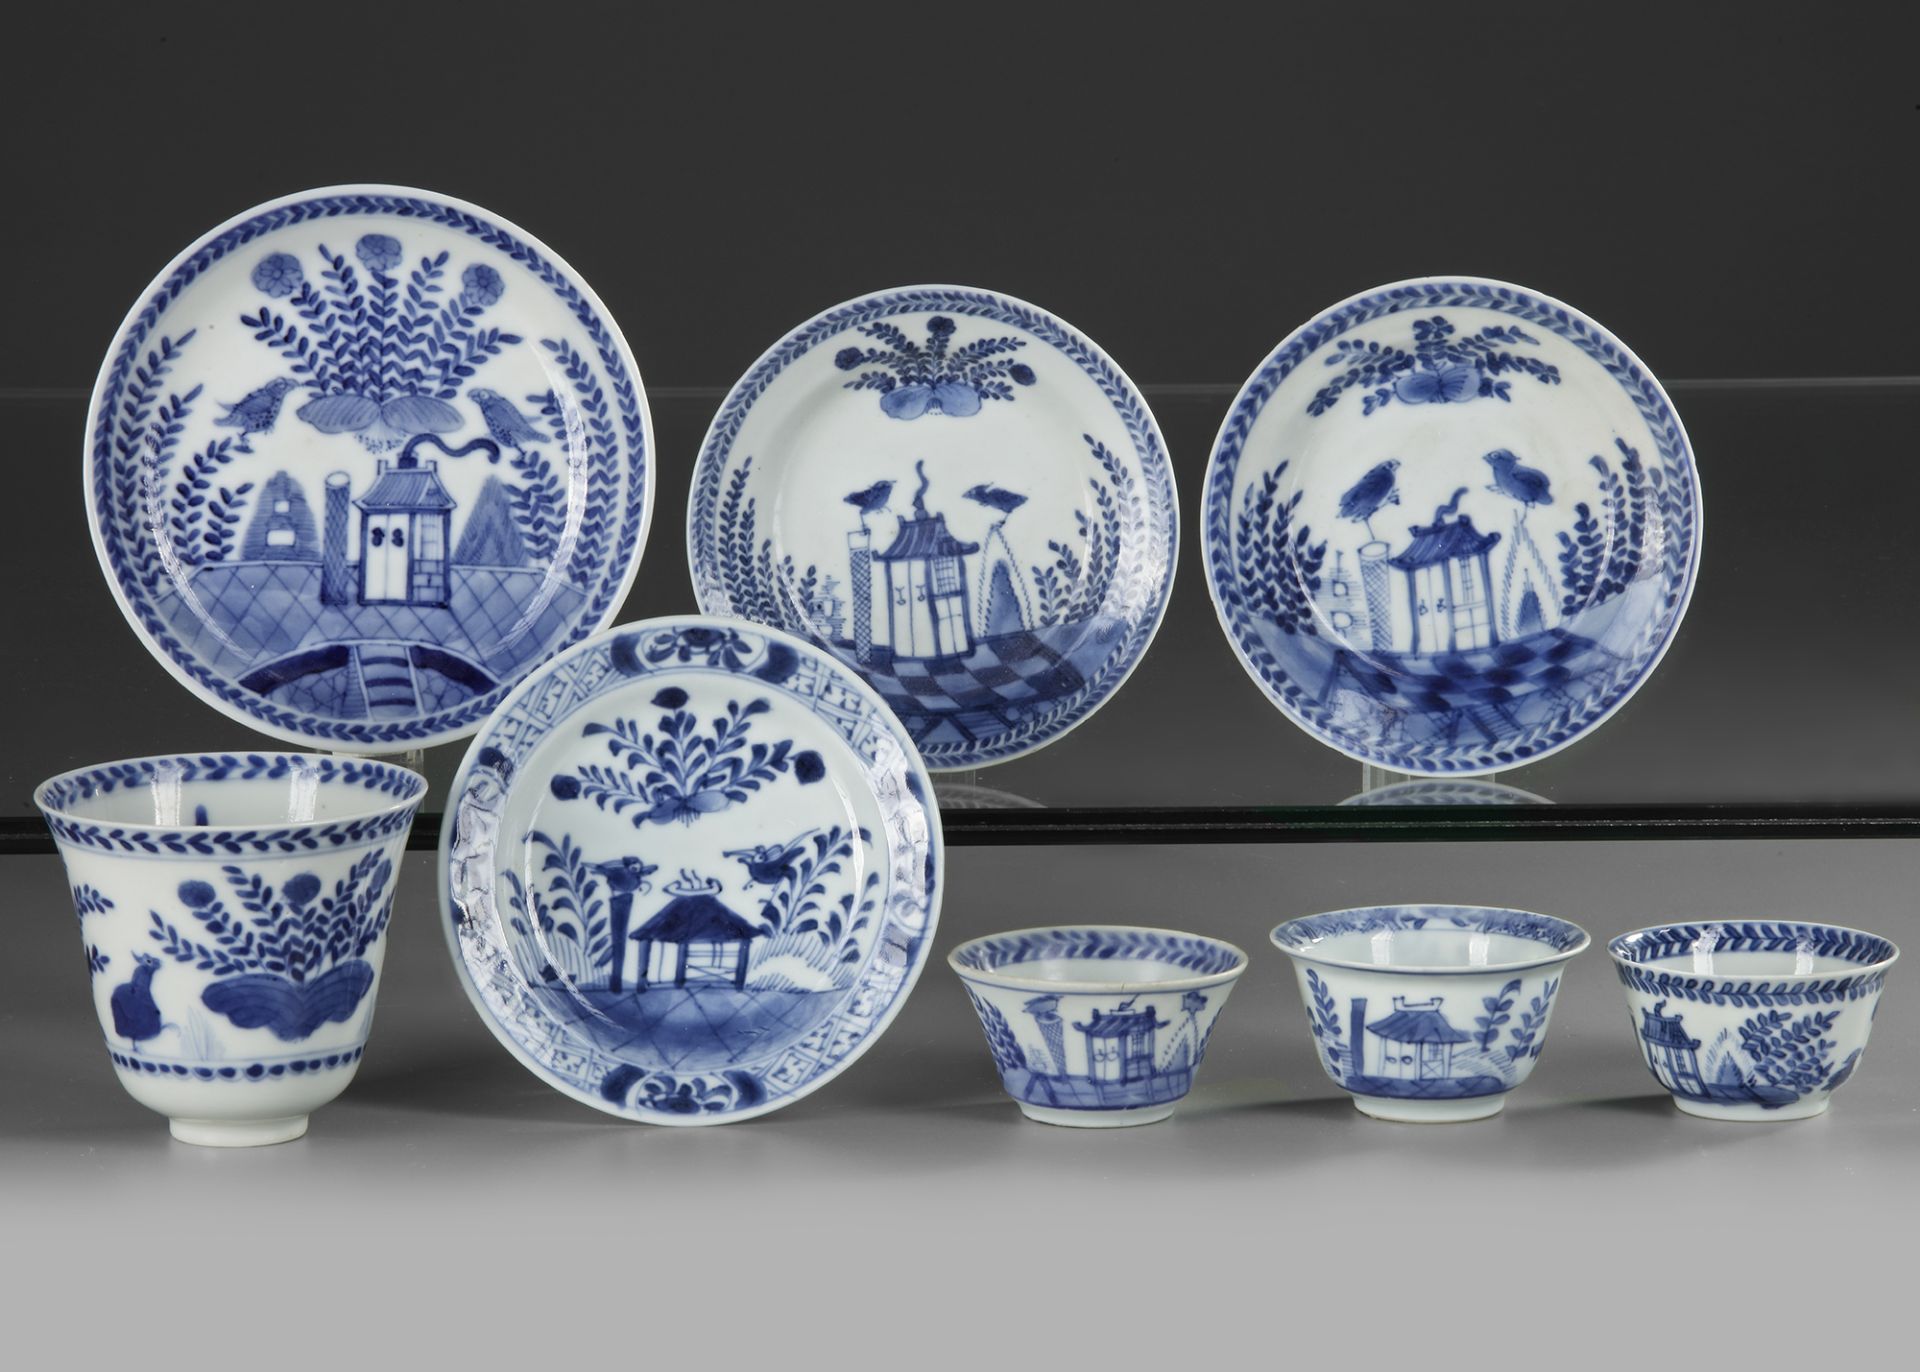 FOUR CHINESE BLUE AND WHITE 'CUCKOO IN THE HOUSE' CUPS AND SAUCERS, 18TH CENTURY - Image 2 of 3